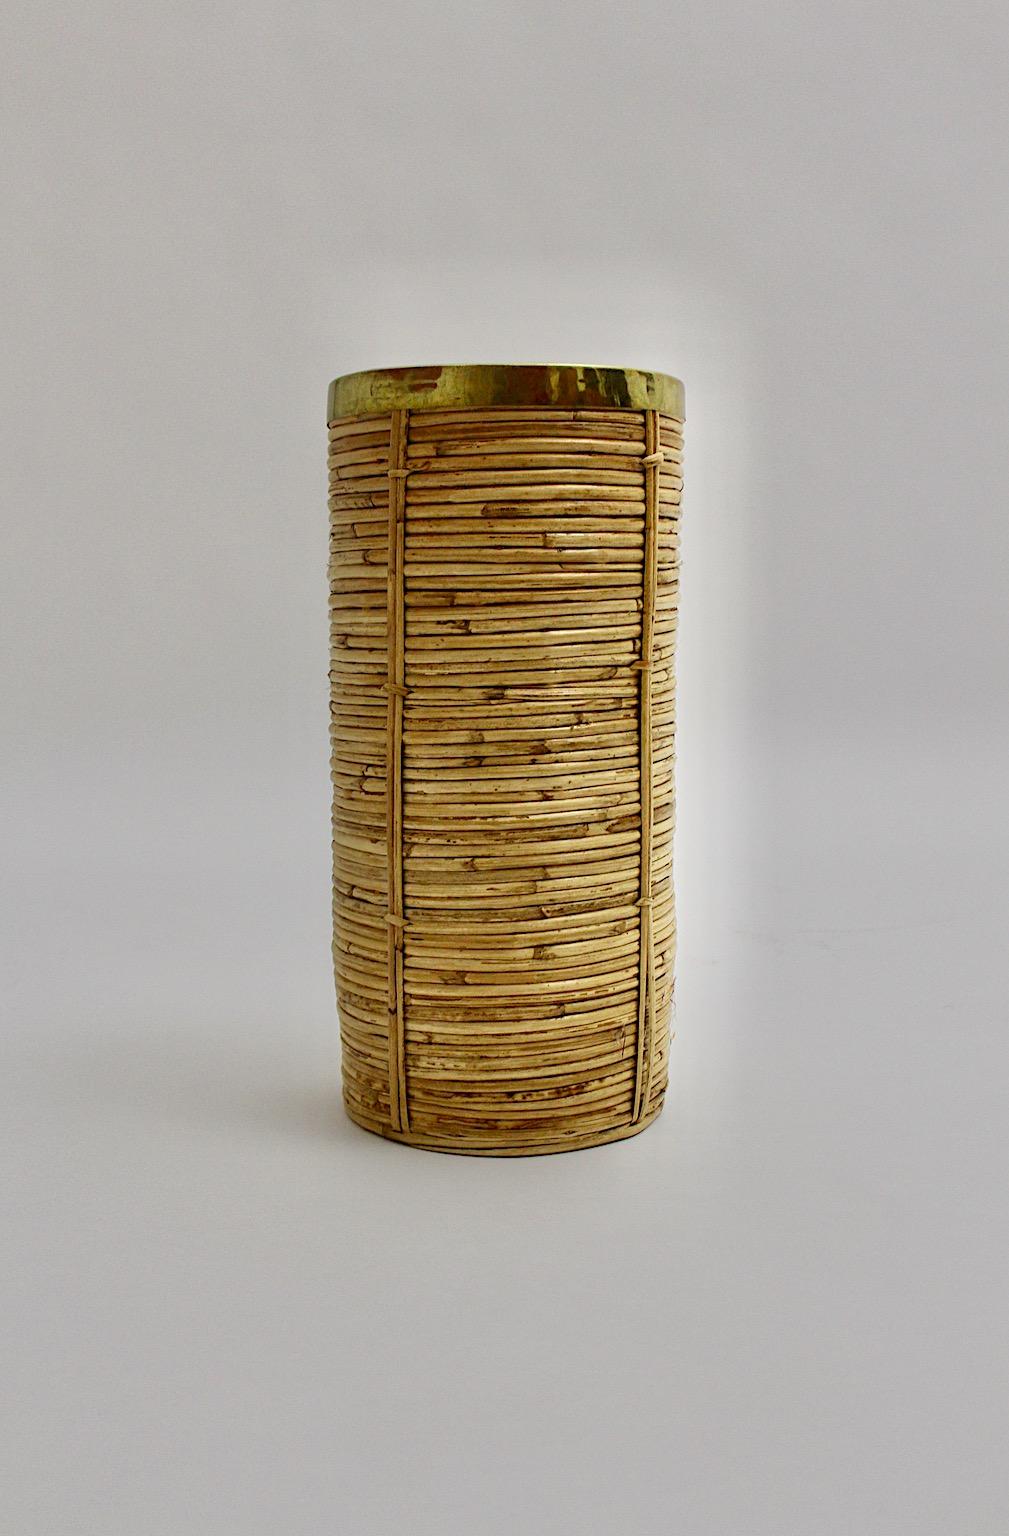 Hollywood Regency Riviera Style Organic Rattan Brass Paper Basket or Cane Holder, 1970s, Italy For Sale